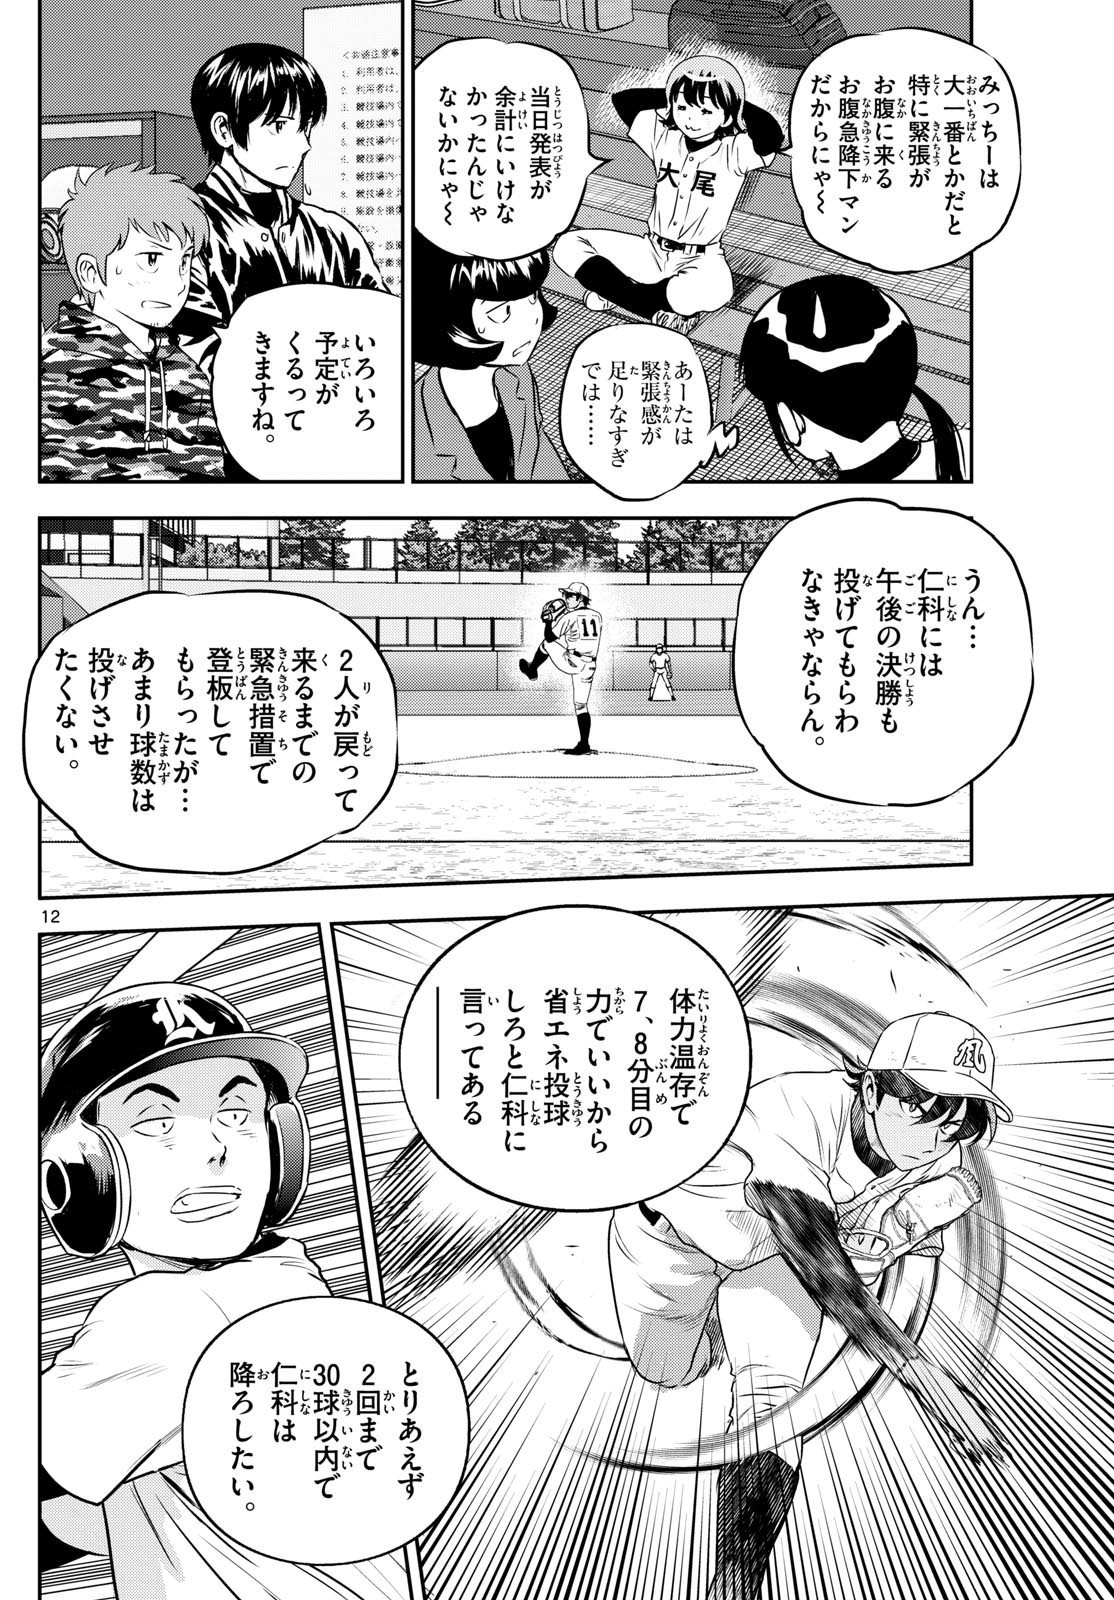 Major 2nd - メジャーセカンド - Chapter 283 - Page 12